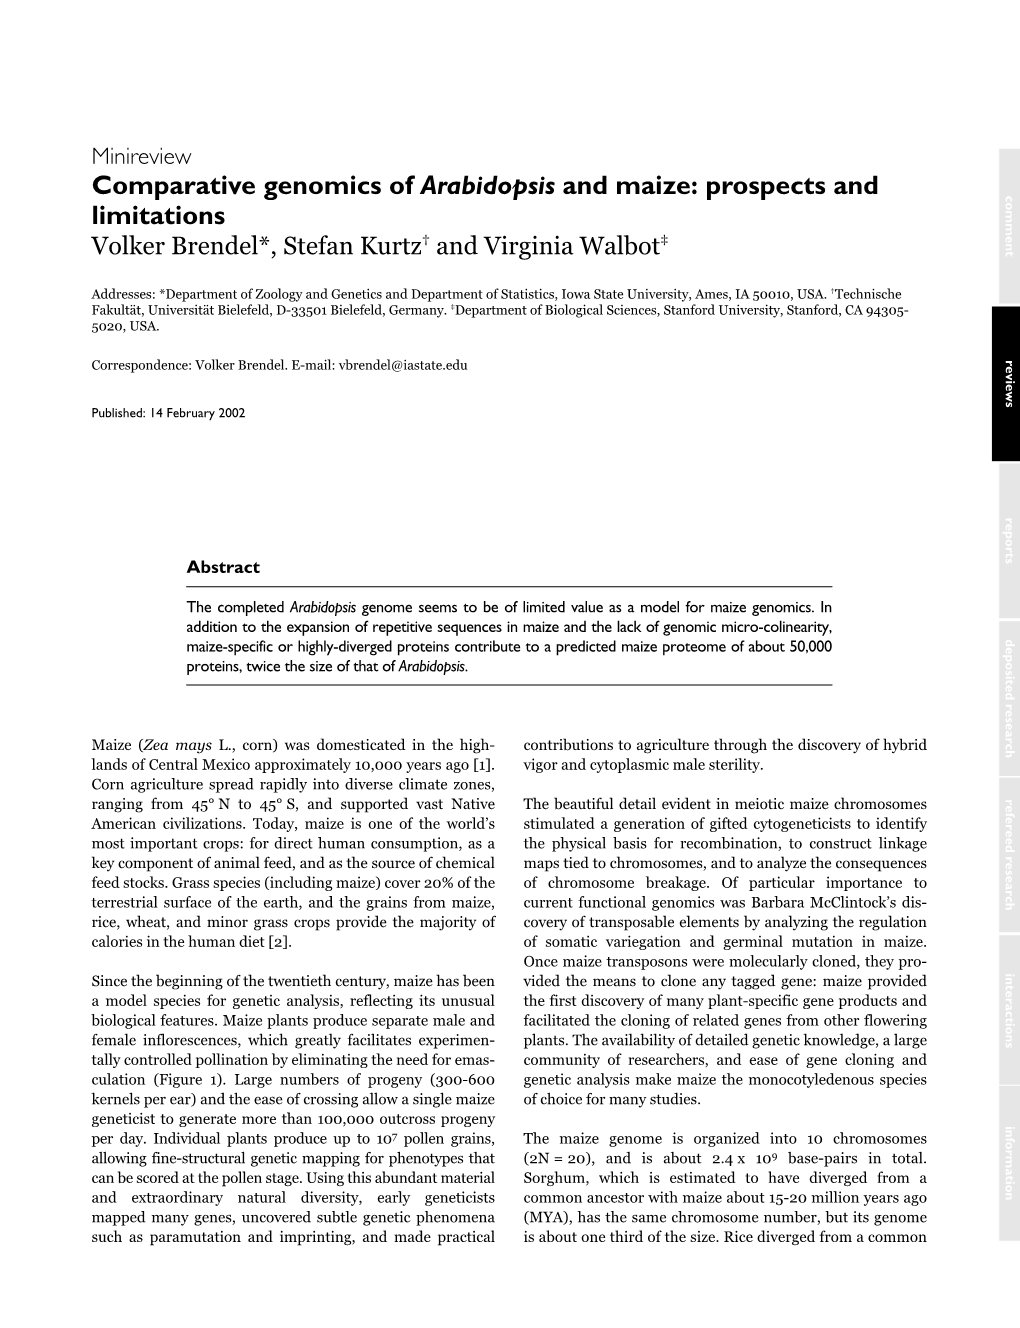 Comparative Genomics of Arabidopsis and Maize: Prospects and Comment Limitations Volker Brendel*, Stefan Kurtz† and Virginia Walbot‡